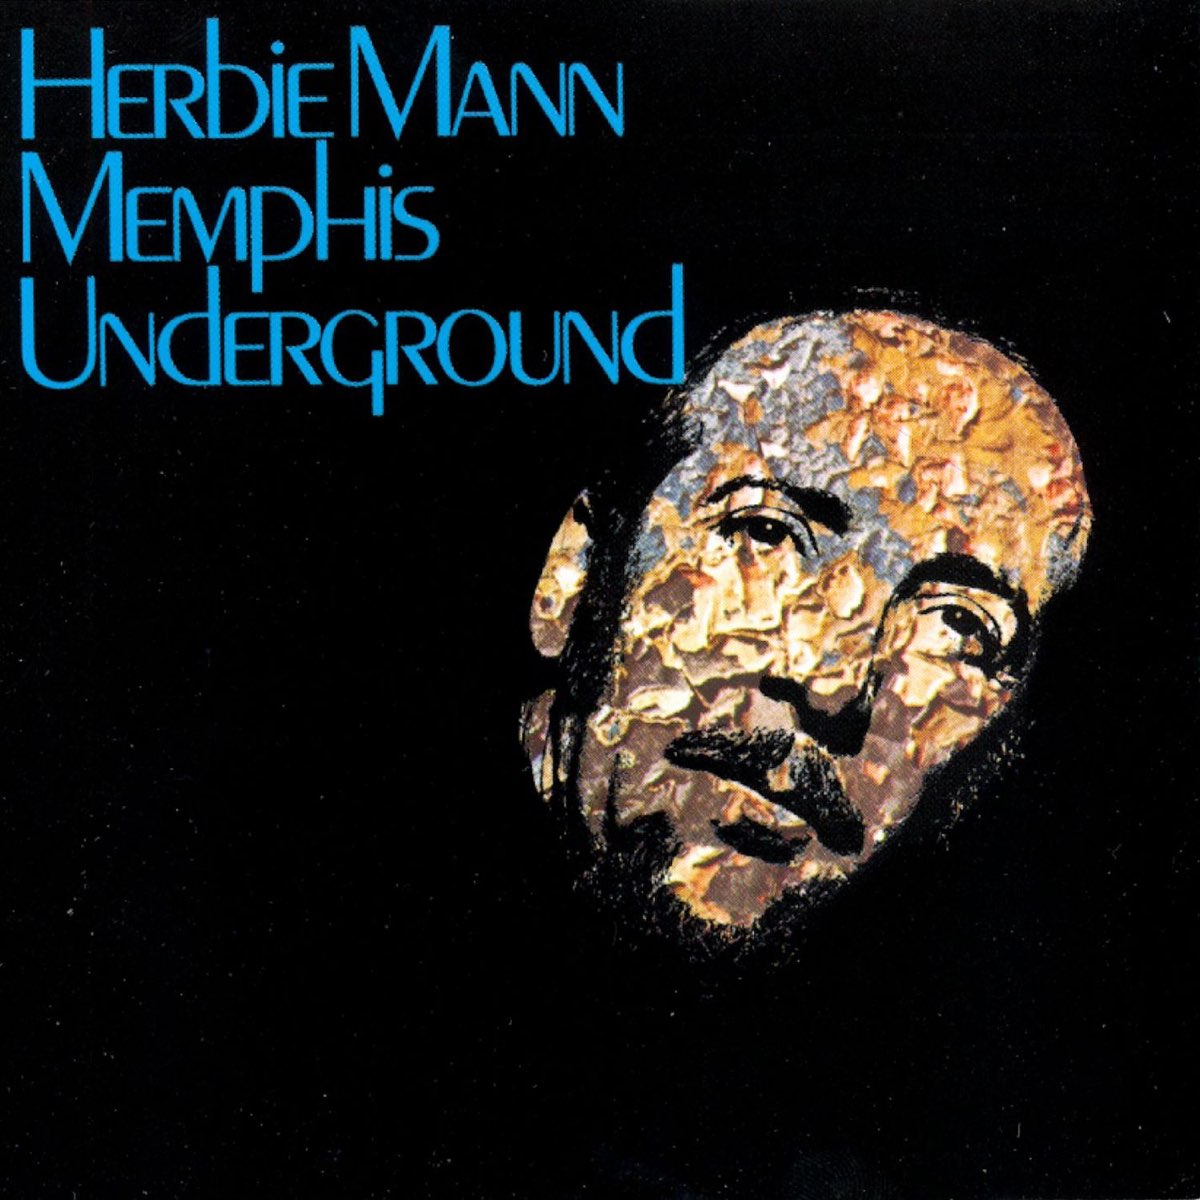 It's a Funky Thing - Right On, Pt. 1 (Memphis Underground) by Herbie Mann  on  Music 